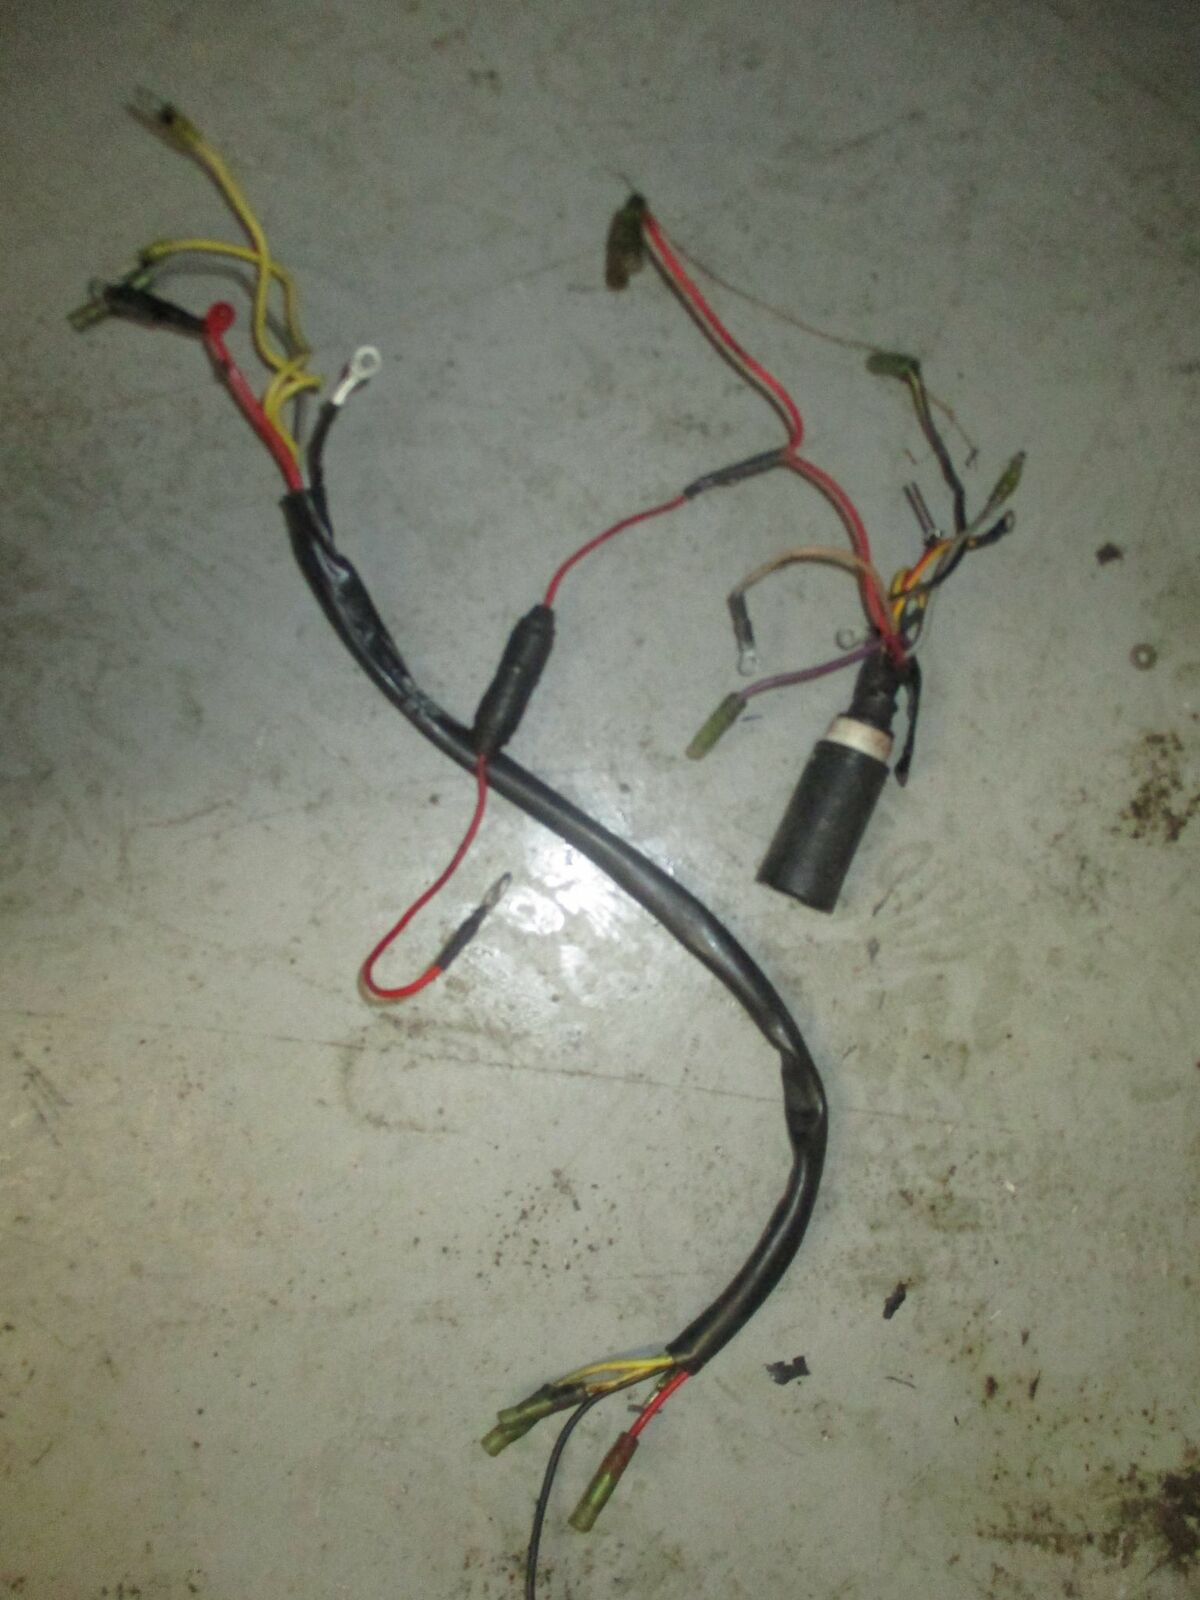 Mercury Mariner 90hp outboard engine wiring harness (41591A13)